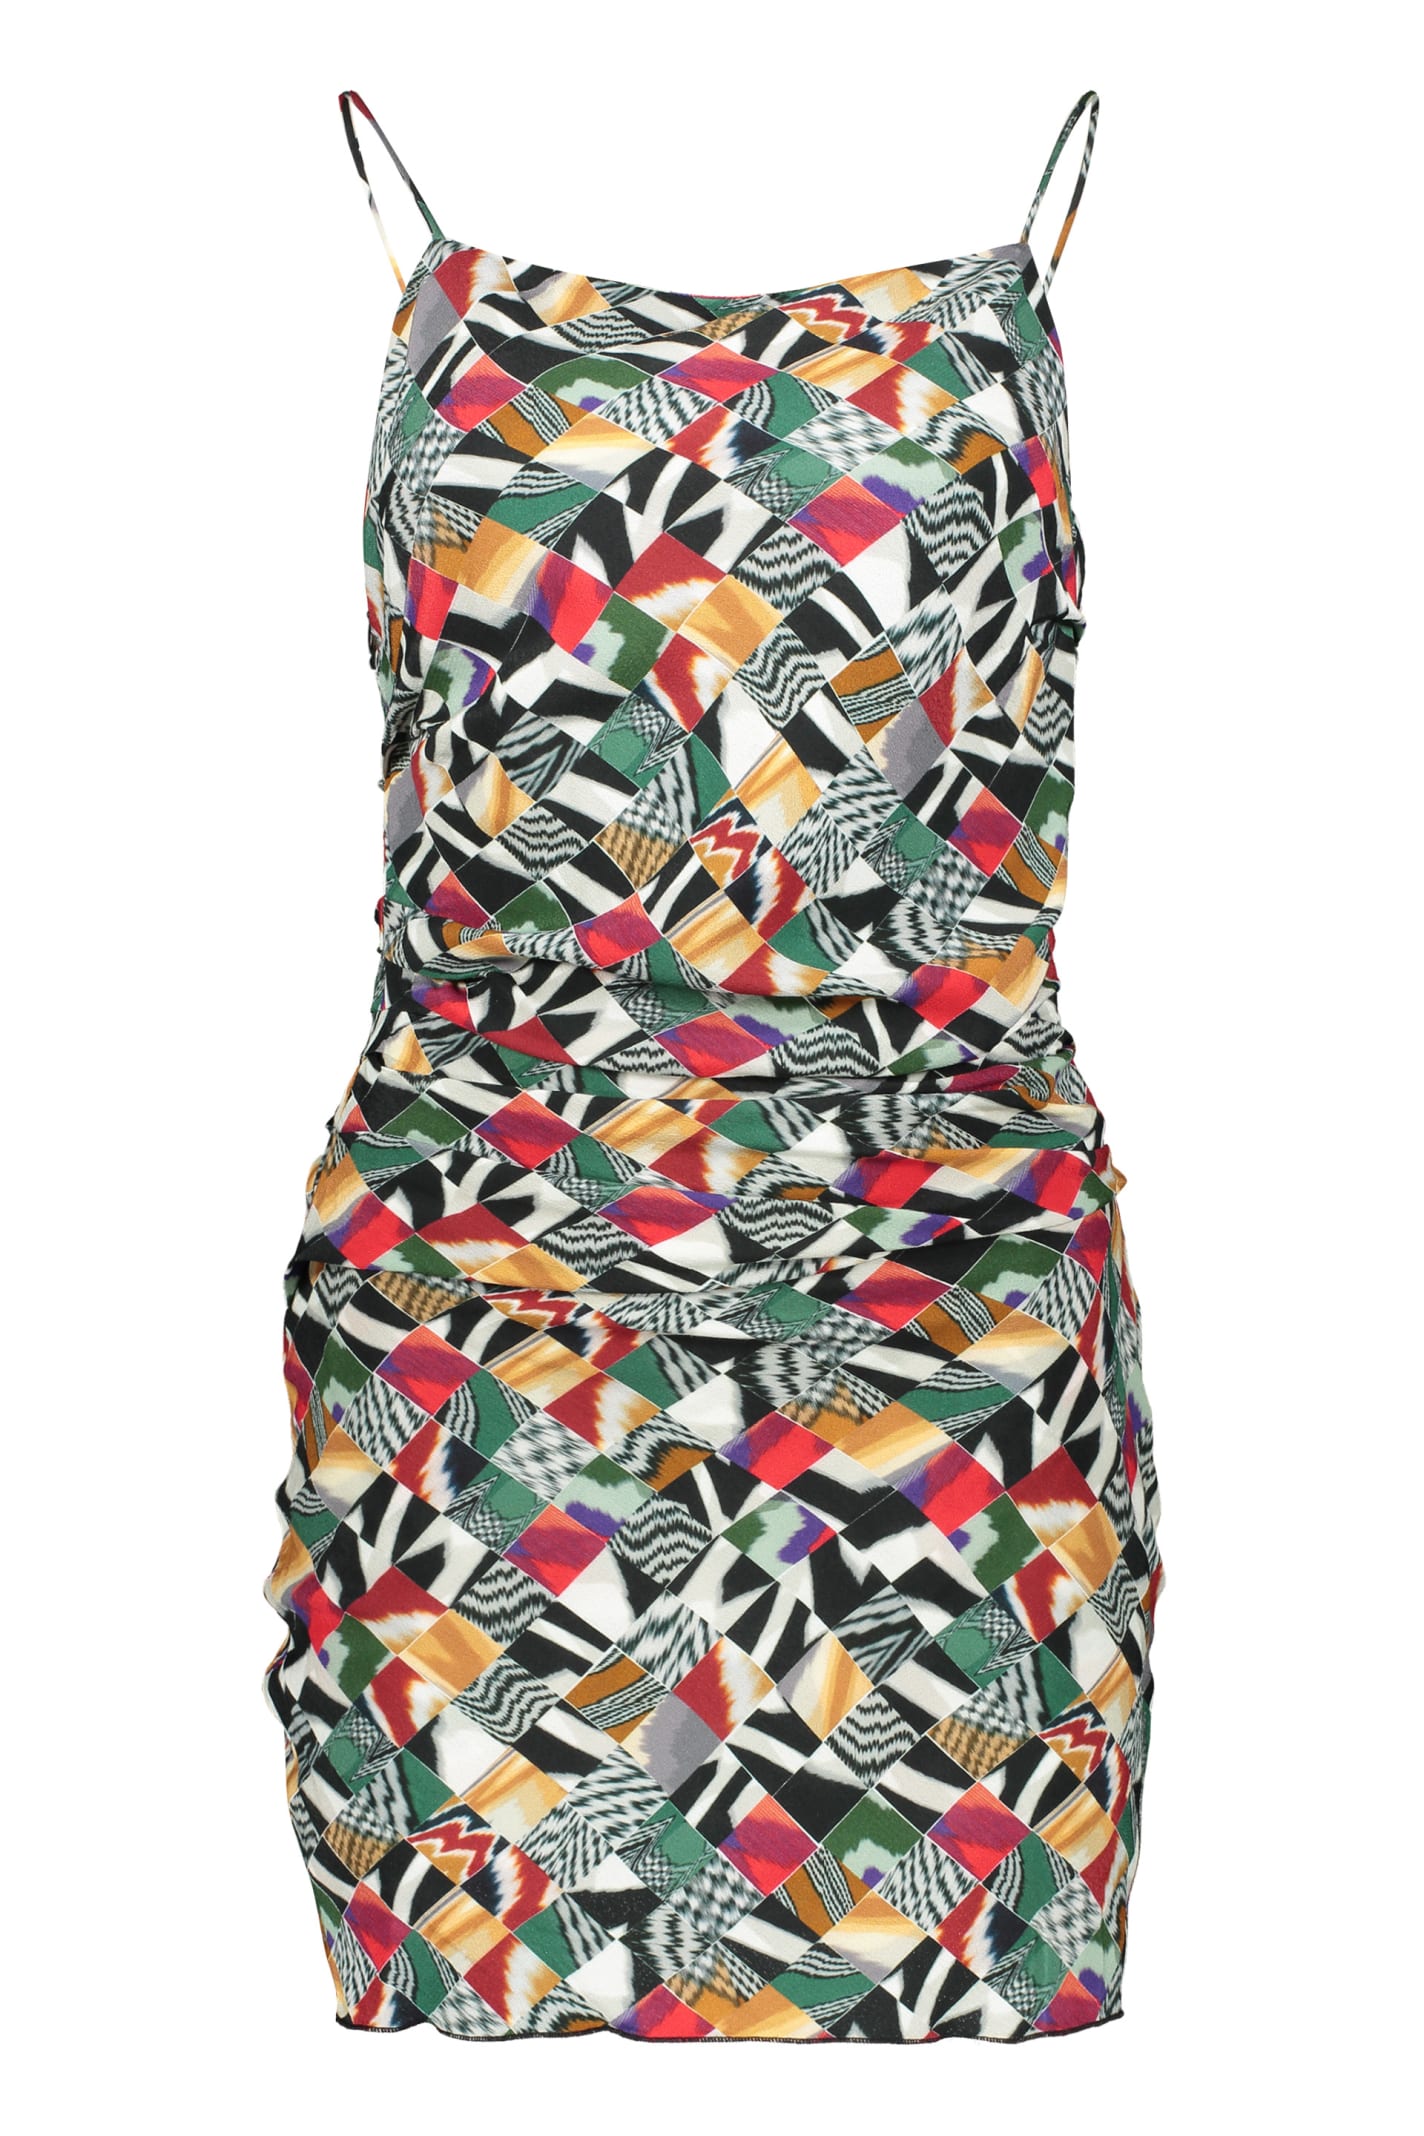 Missoni Gathered Printed Dress In Multicolor